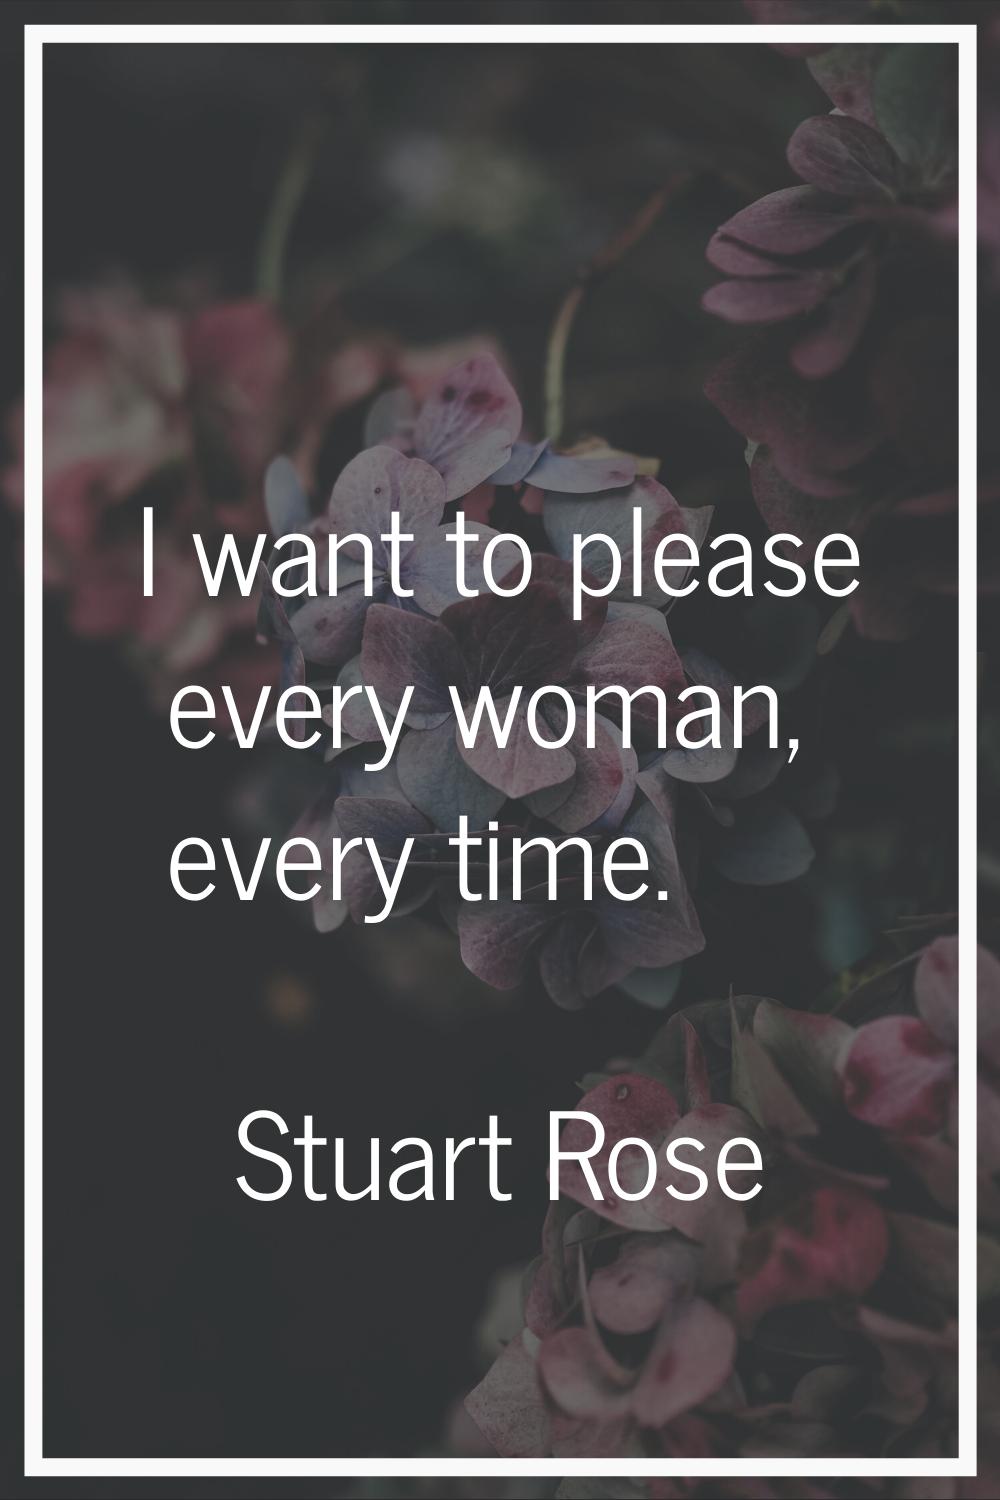 I want to please every woman, every time.